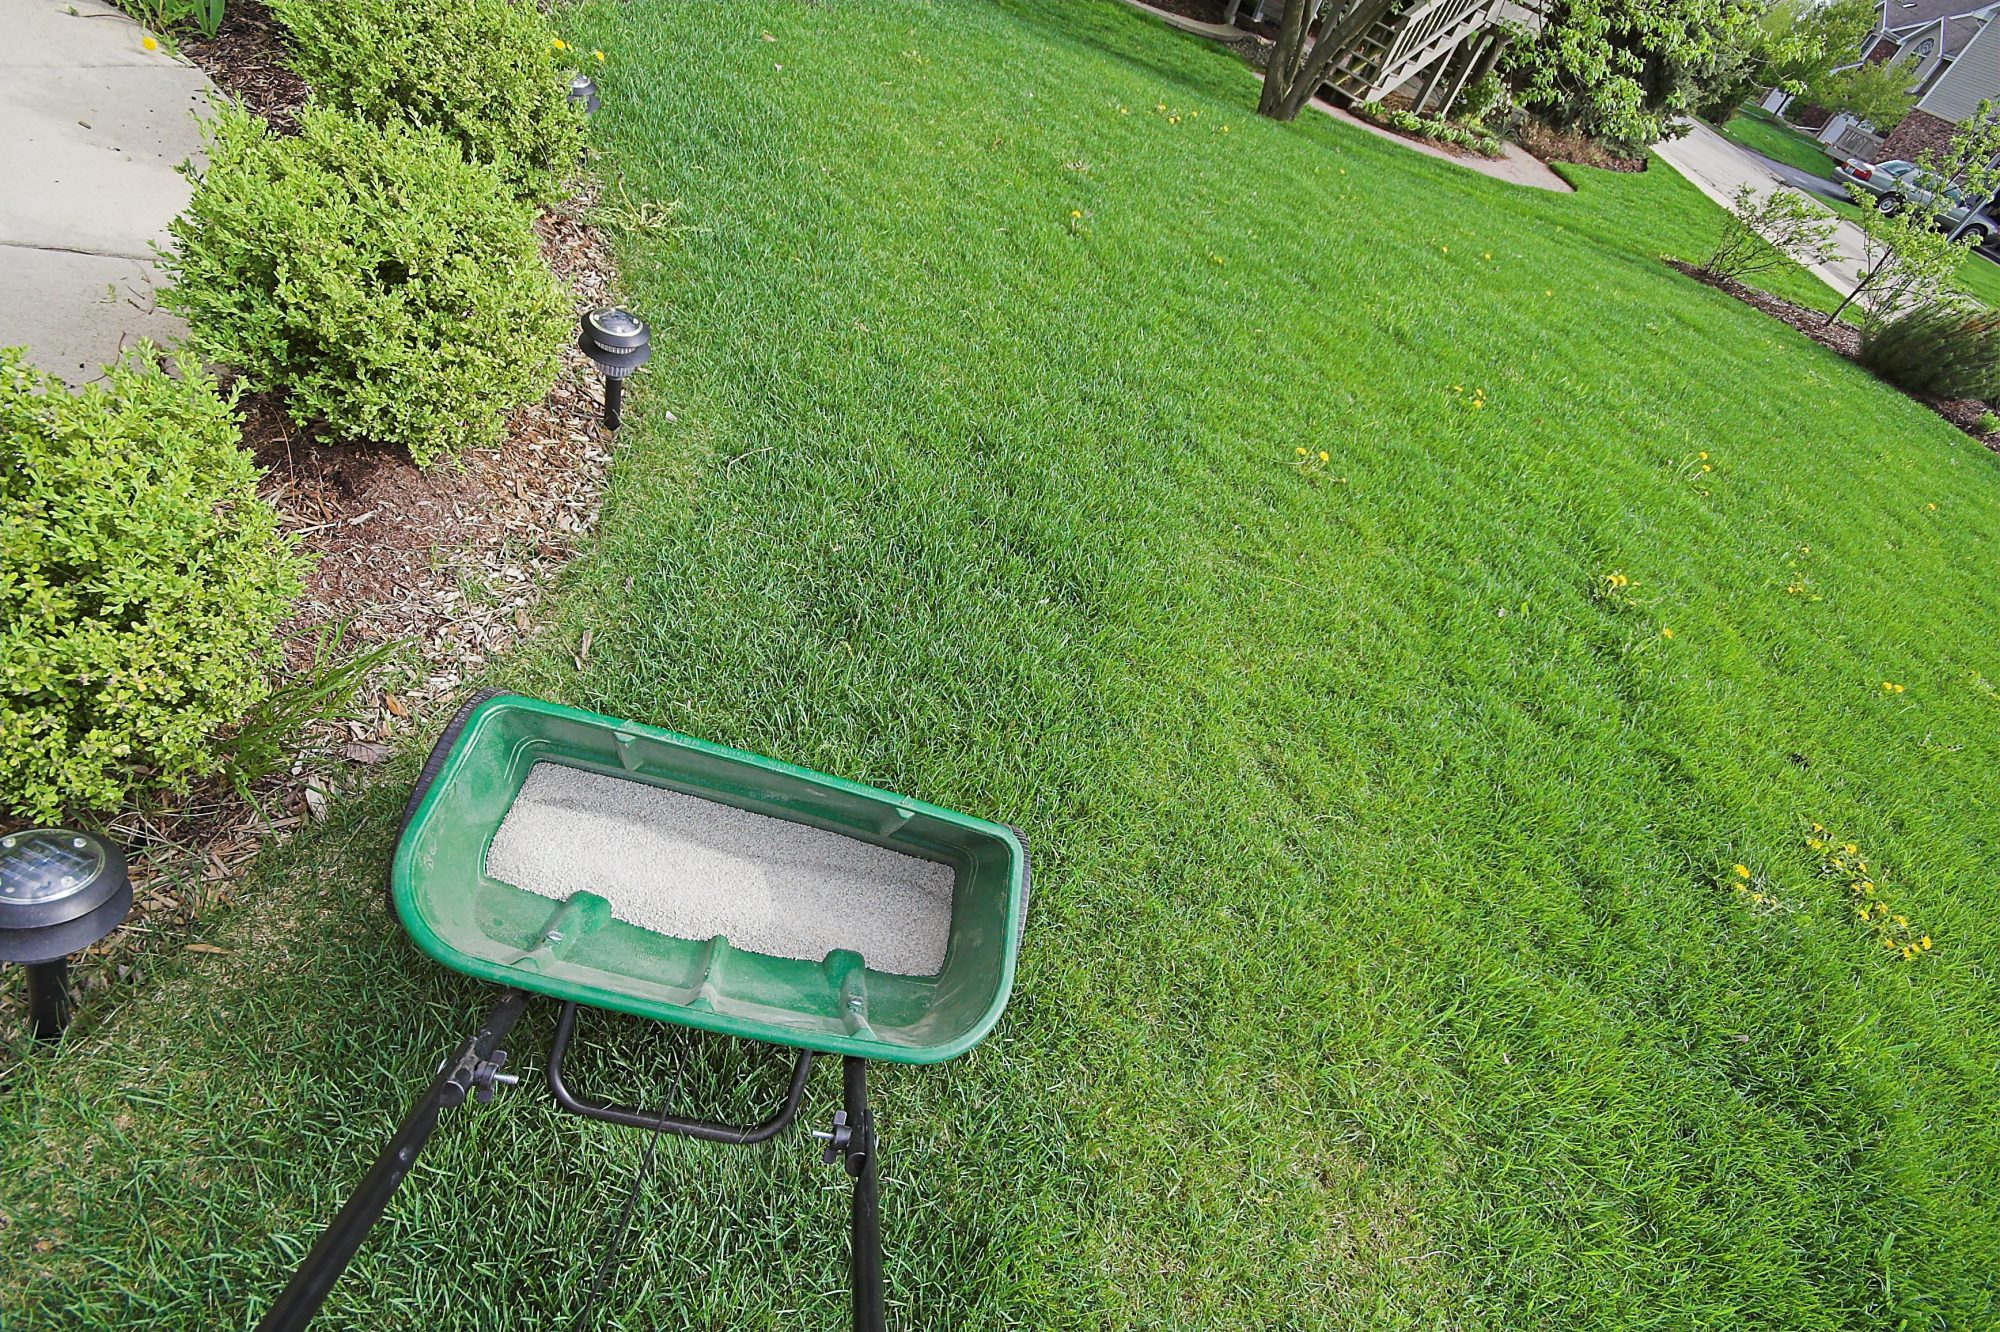 9 FAQs About Applying Starter Fertilizer to Your Lawn - Lawnstarter